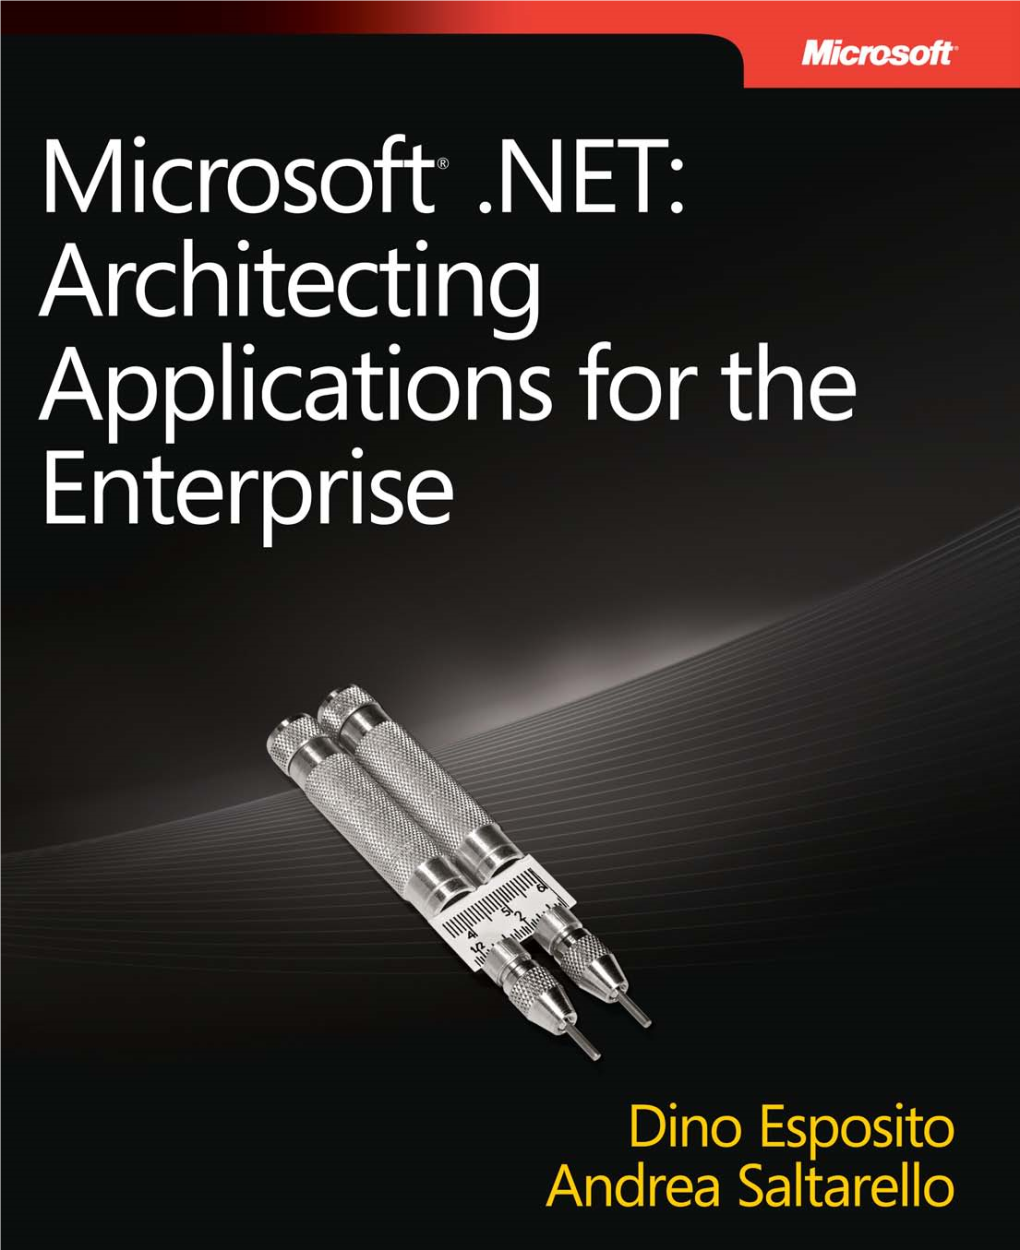 Microsoft .NET: Architecting Applications for the Enterprise Ebook